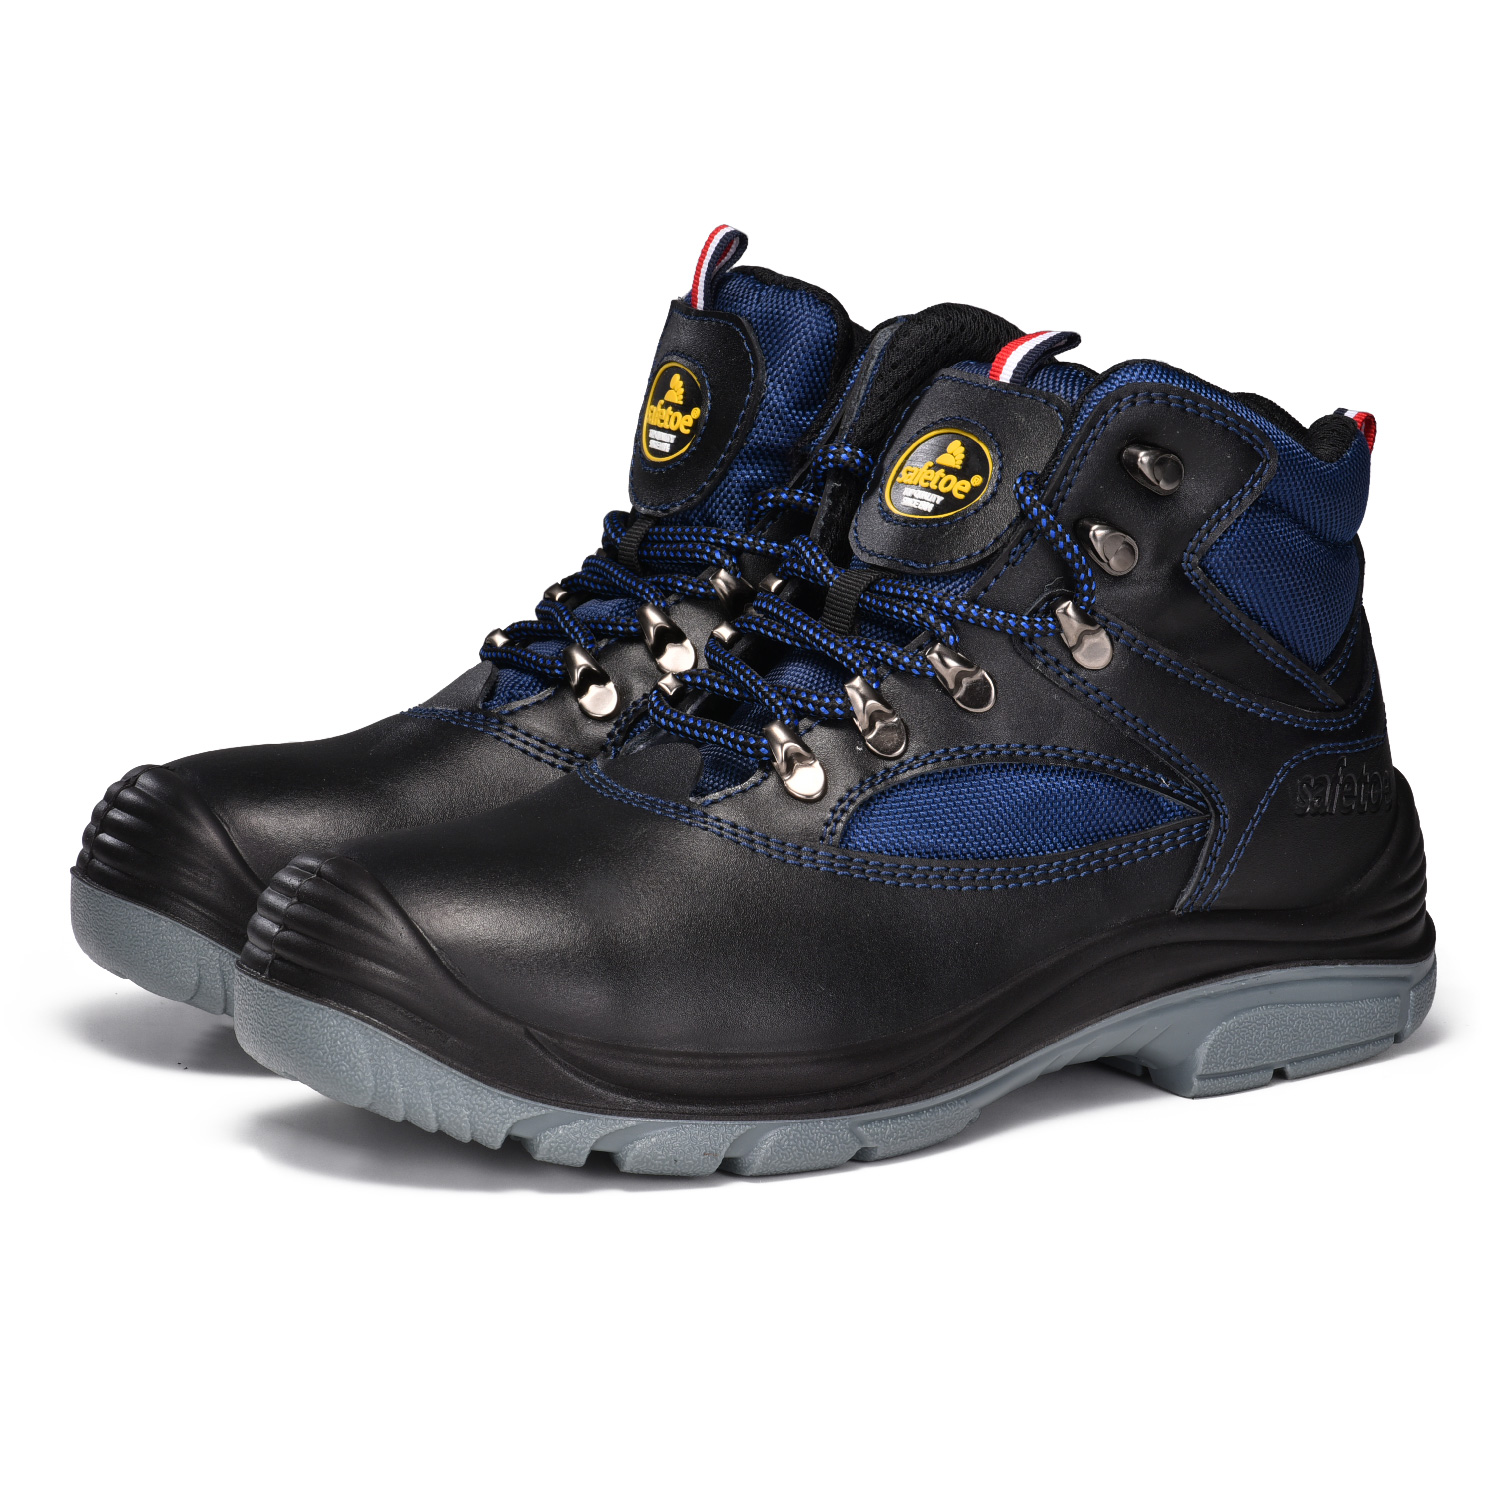 S3 Industrial Leather Work Boots with Composite Toe M-8570